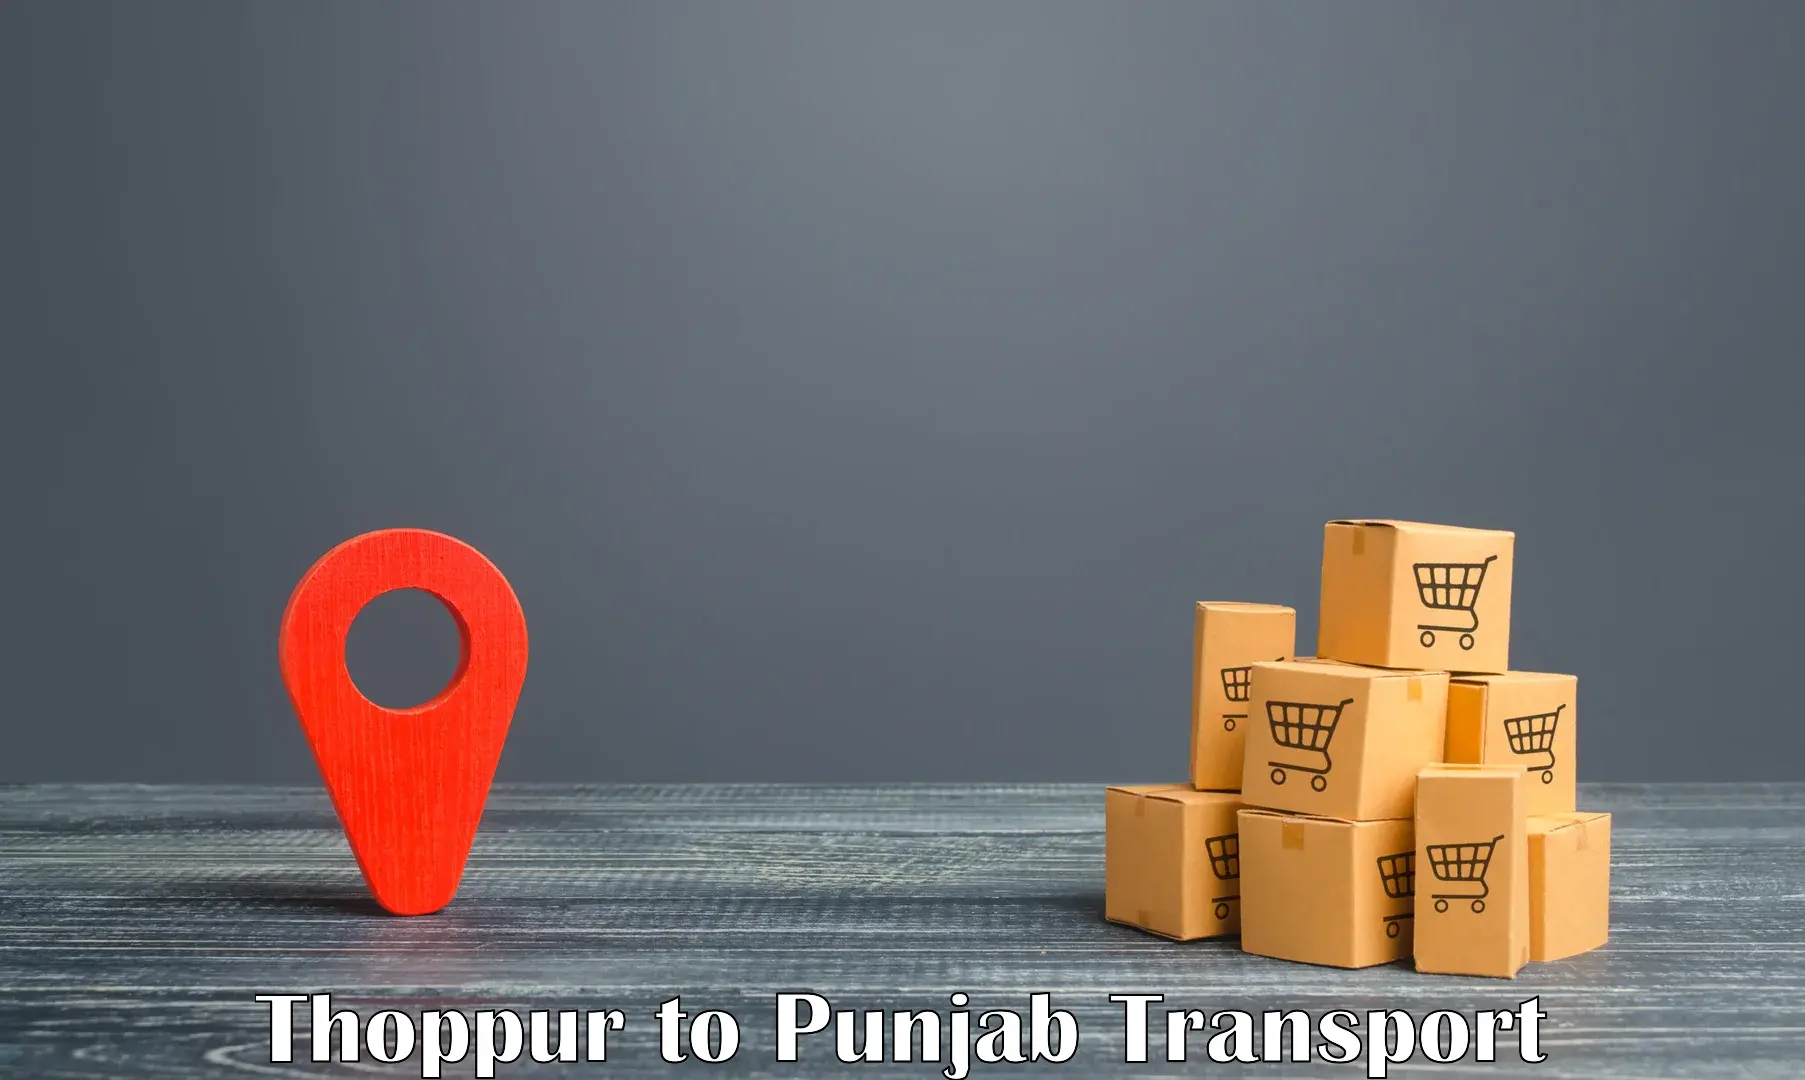 Container transport service Thoppur to Nangal